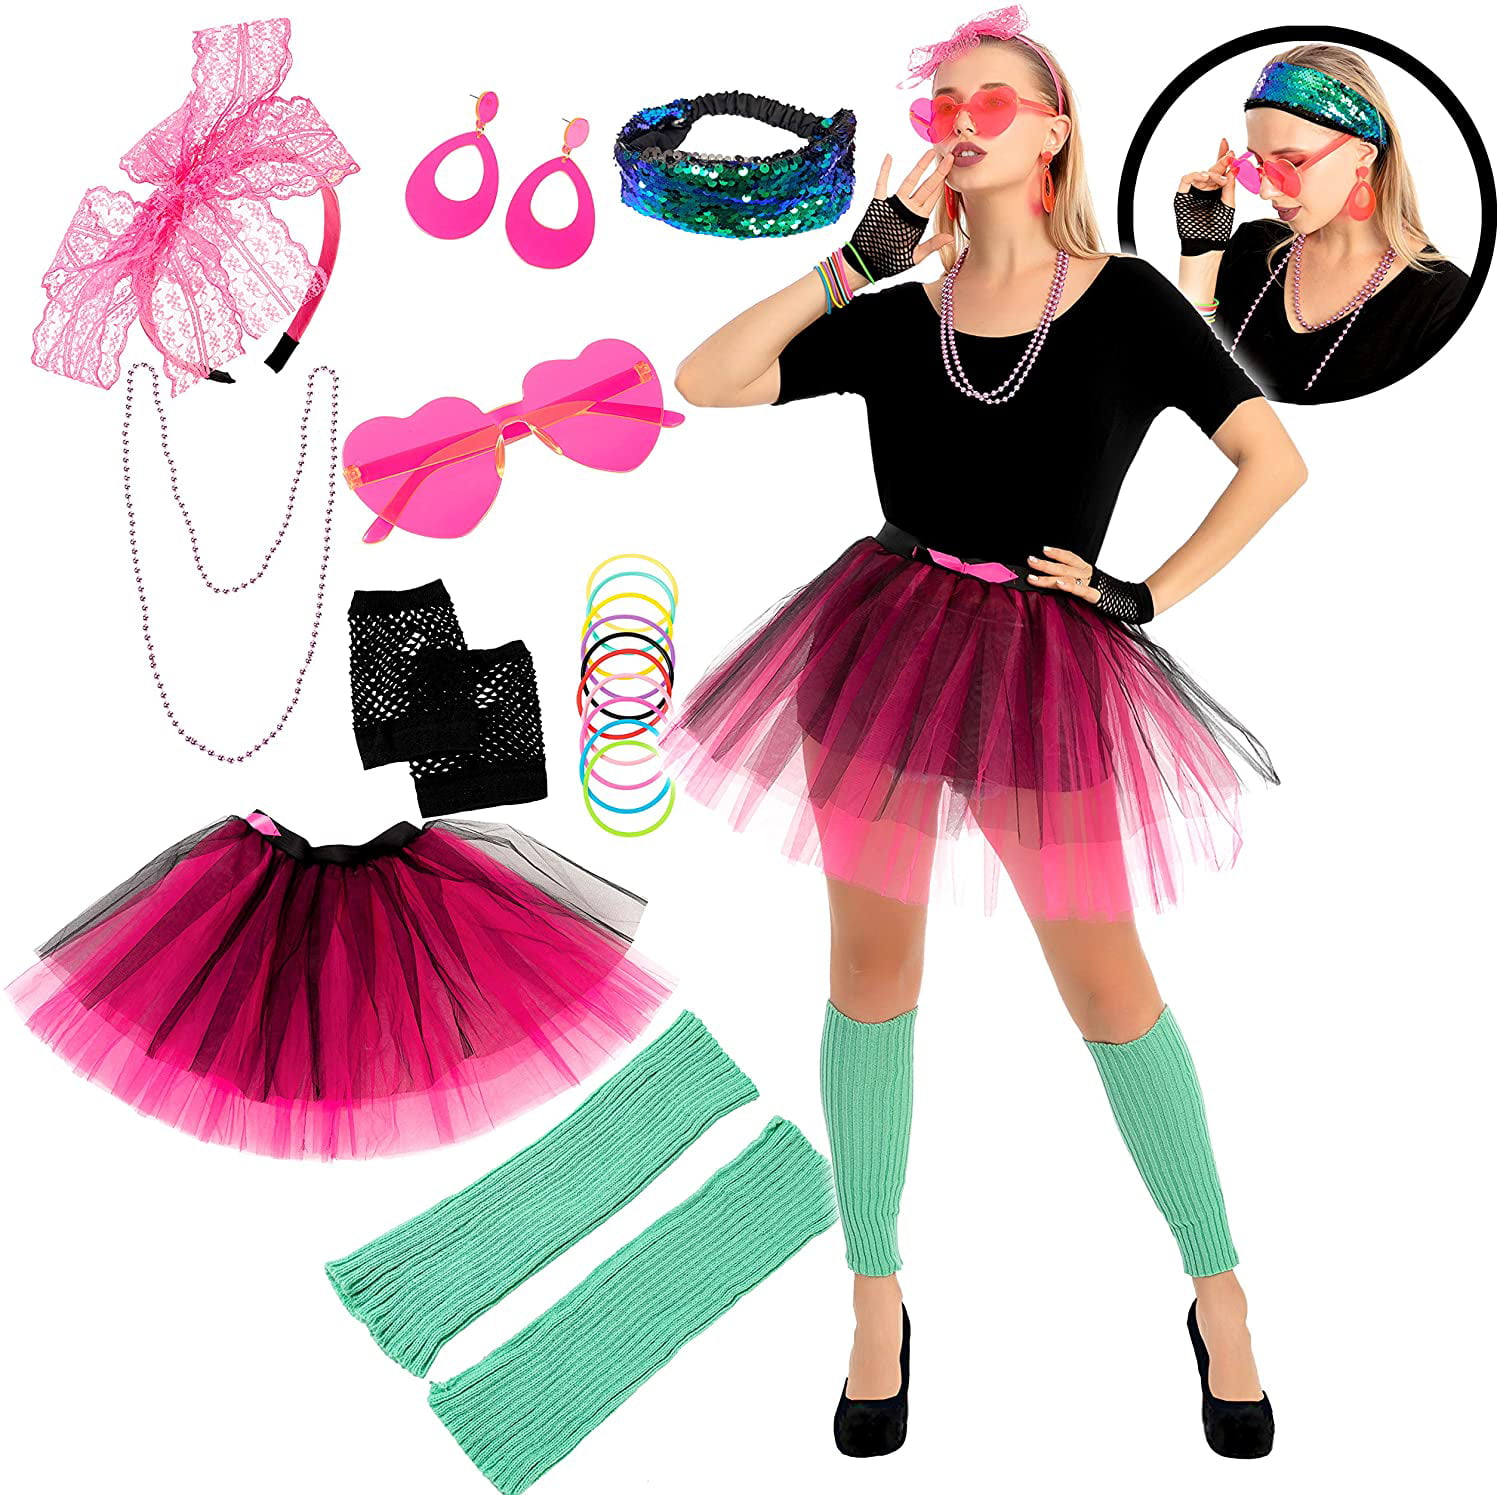 9 Pcs 80s Costume Accessories Set with Tutu Skirt Headband Glasses Necklace and Other Accessories for Halloween Cosplay Party